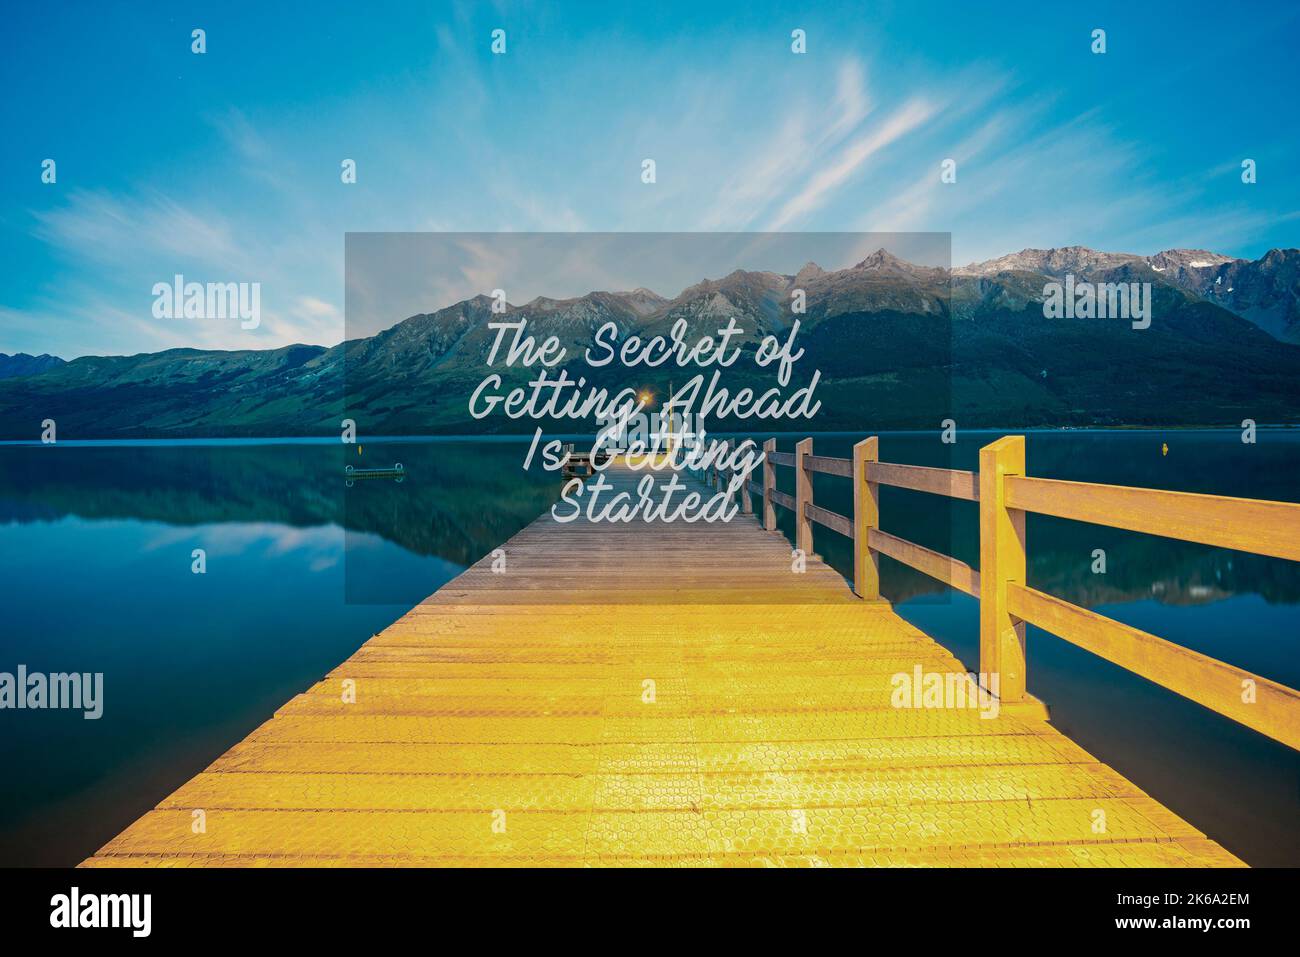 https://c8.alamy.com/comp/2K6A2EM/inspirational-success-quotes-on-the-mountain-sunset-background-the-secret-of-getting-ahead-is-getting-started-2K6A2EM.jpg